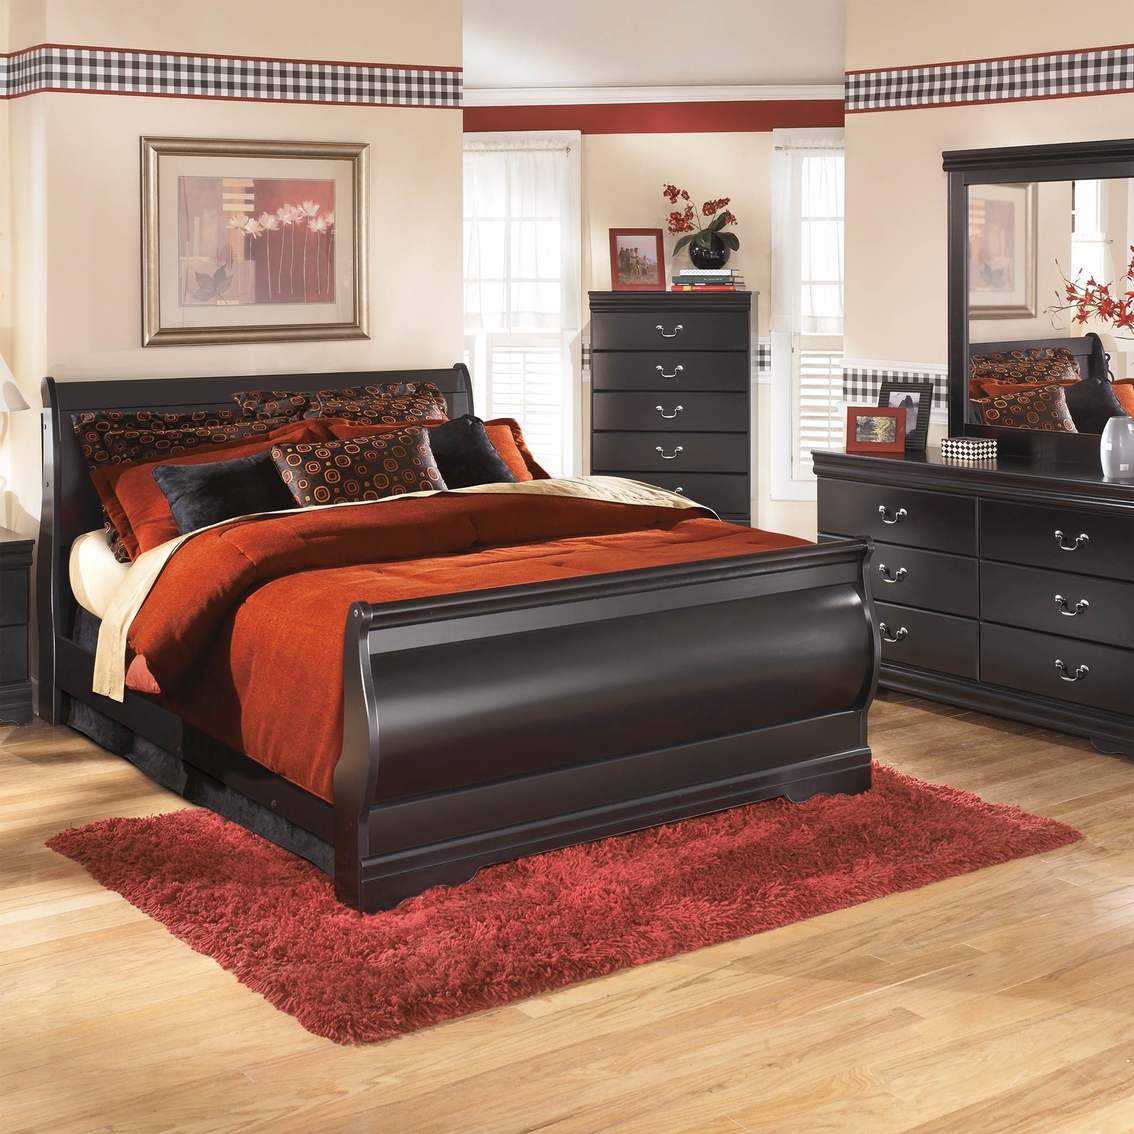 Signature Design by Ashley Huey Vineyard Sleigh Bed - Image 2 of 3